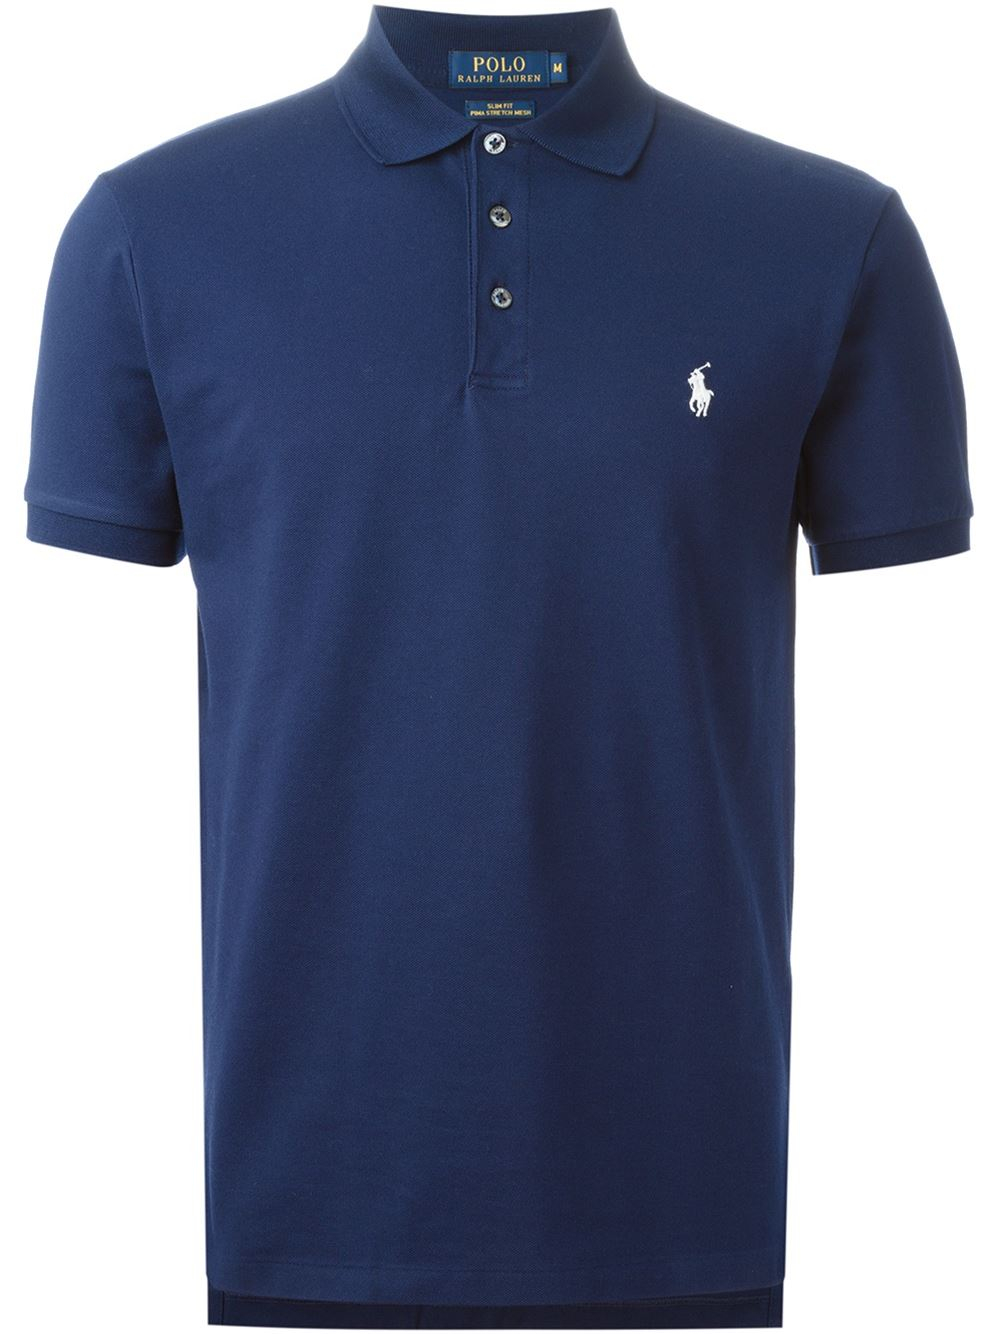 Polo Ralph Lauren Cotton Embroidered Logo Polo Shirt in Blue for Men - Lyst